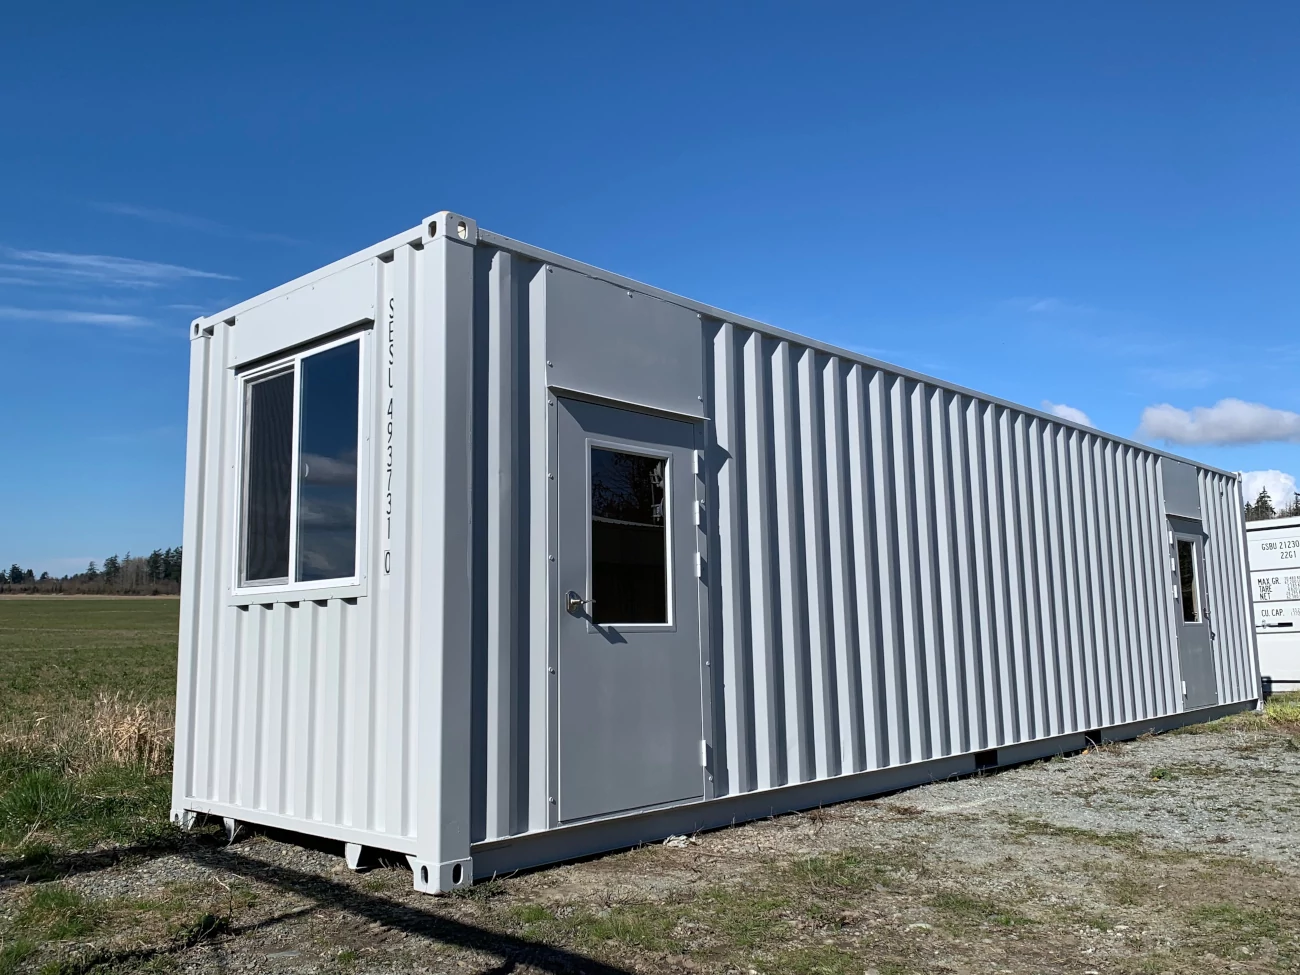 Dimensions of 40 foot High Cube Shipping Container